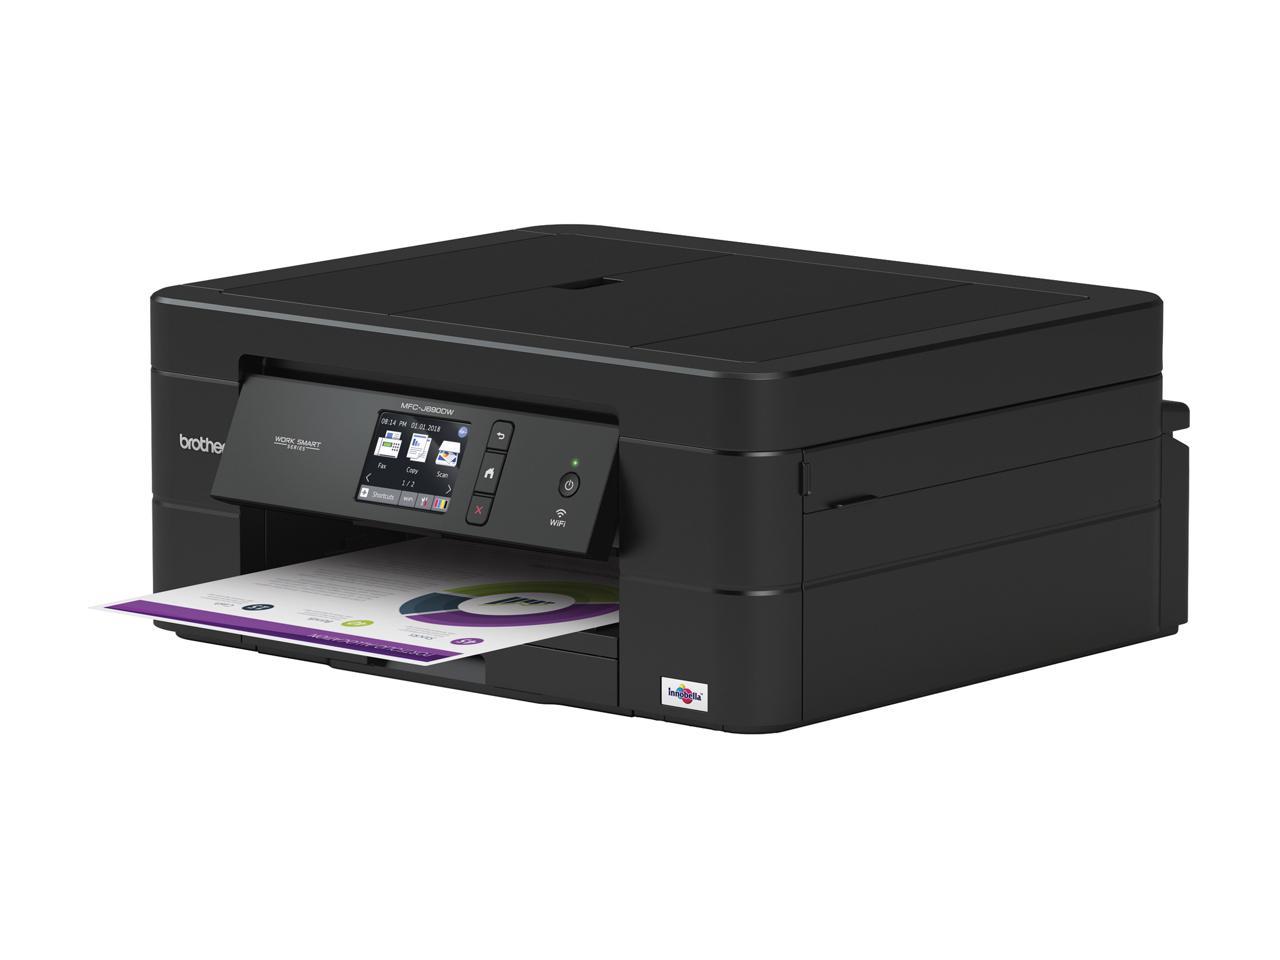 Brother MFC-J690DW Wireless Duplex Multi-function Color All-in-One Inkjet Printer with Mobile Printing